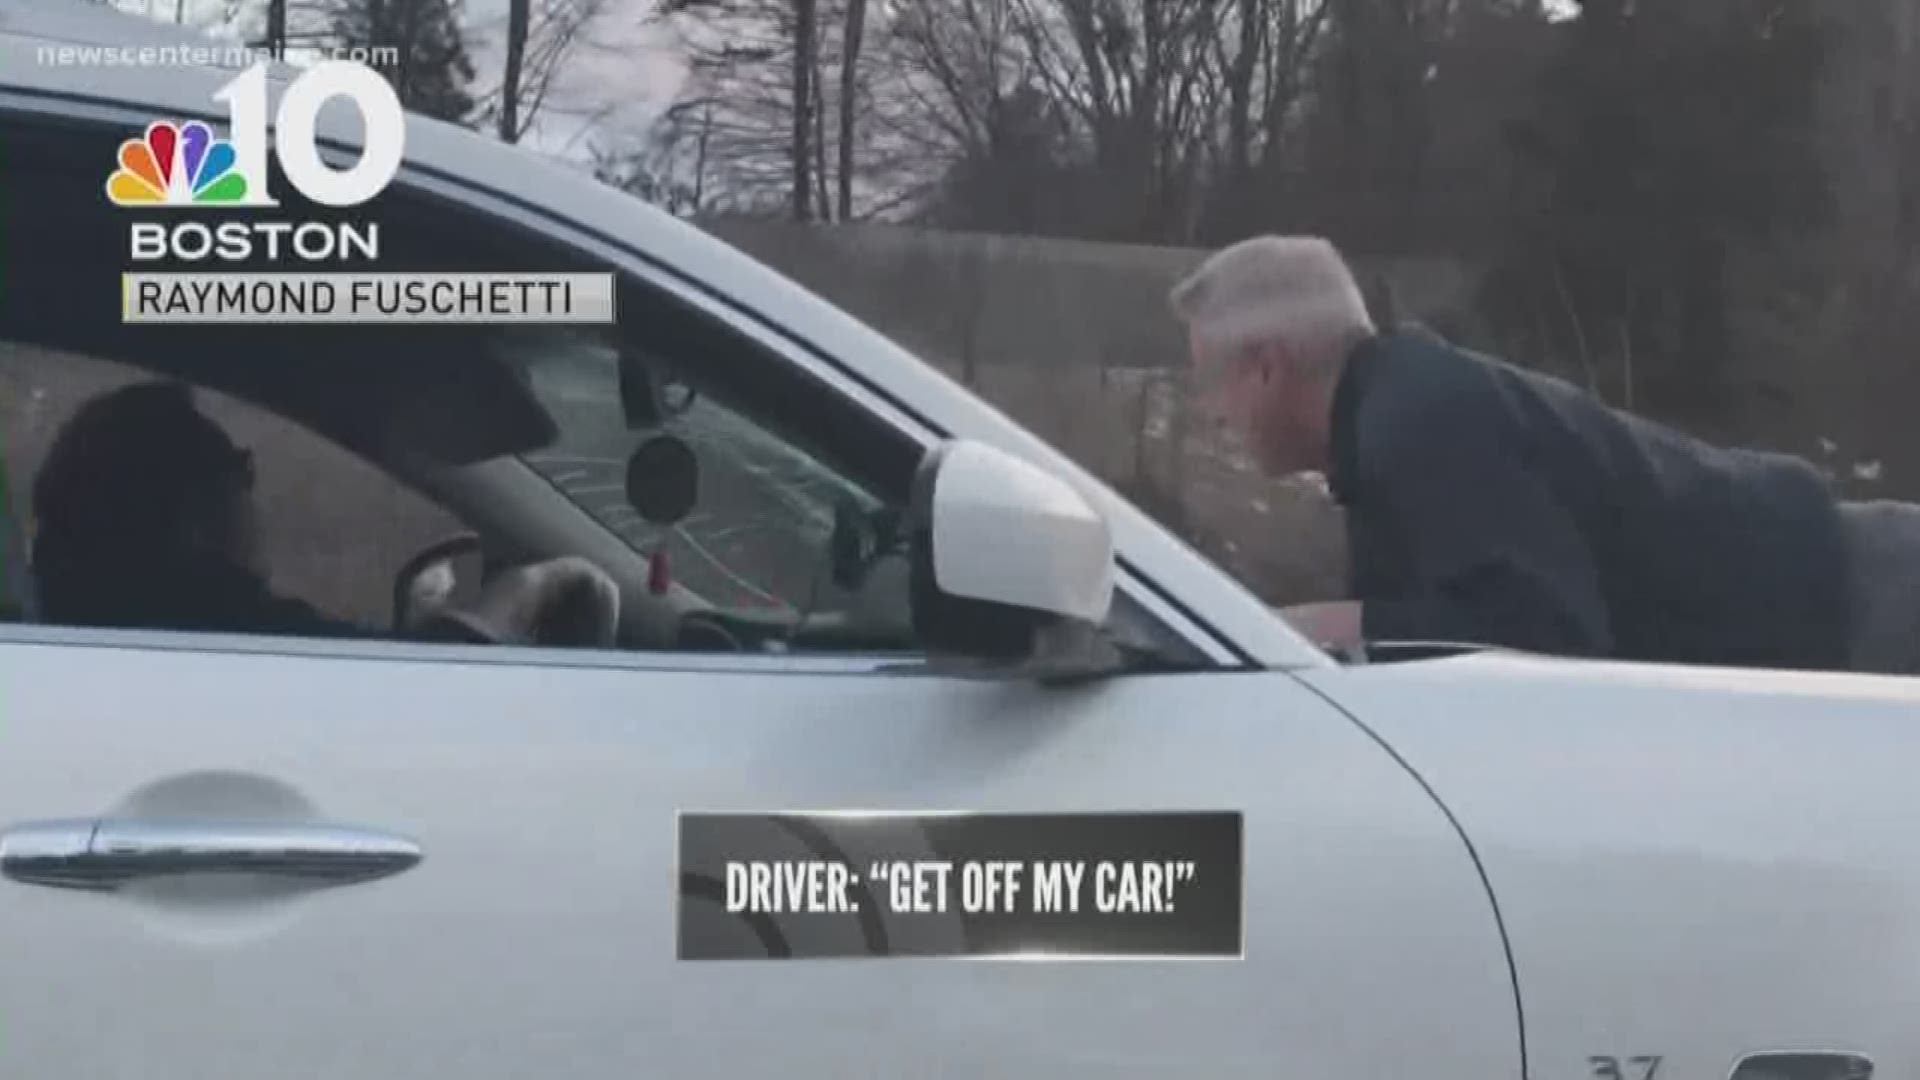 New details are emerging after a case of road rage on the Massachusetts Pike turned dangerous last Friday.